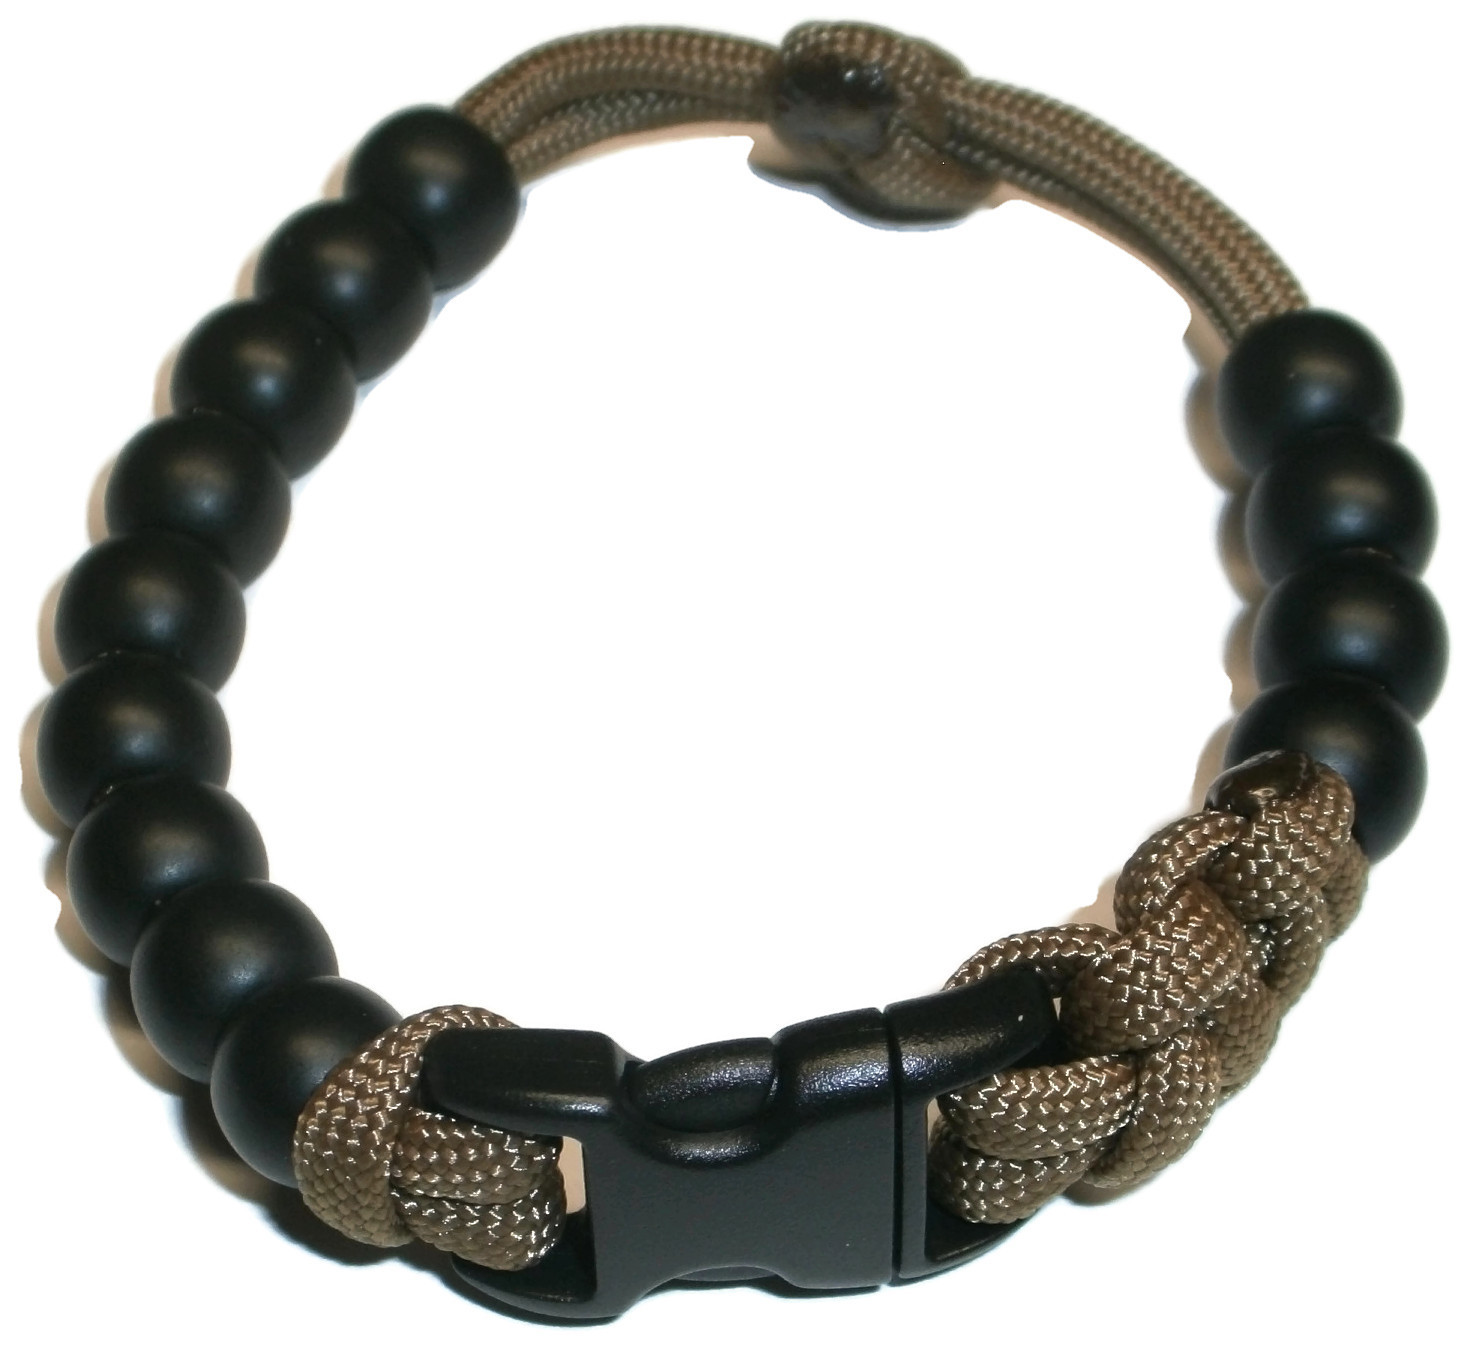 Redvex Pace Counter Bead Bracelet -  Ranger Bead Bracelet - Choose Your Color and Size - Customization Available